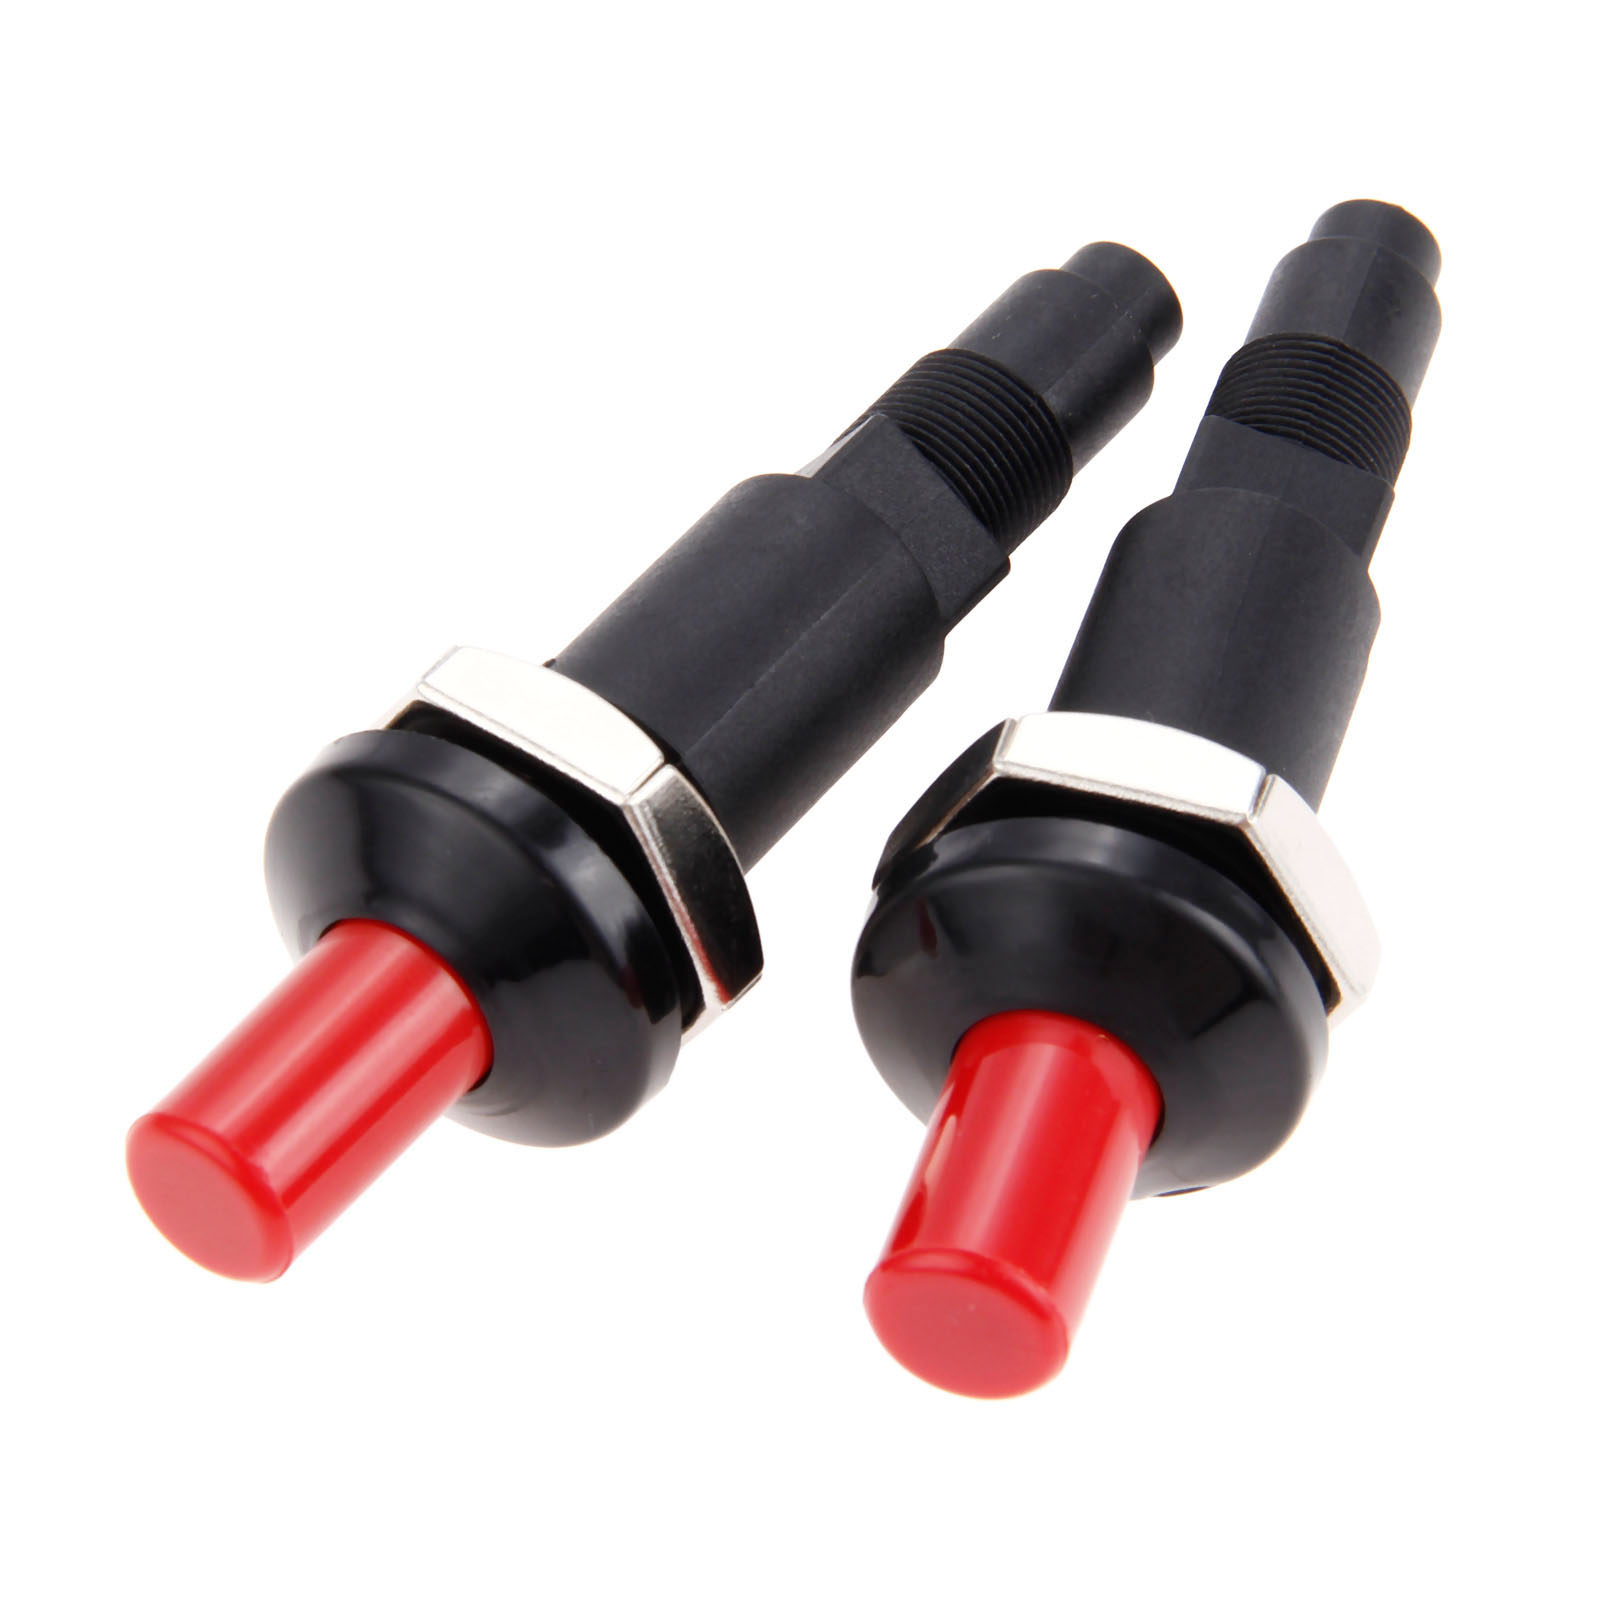 2 Pcs Piezo Ceramic Ignitor Kit for Propane Gas Heaters BBQ Grill Igniter Gas Stove Fireplace Parts Ignitor Kit One Outlet